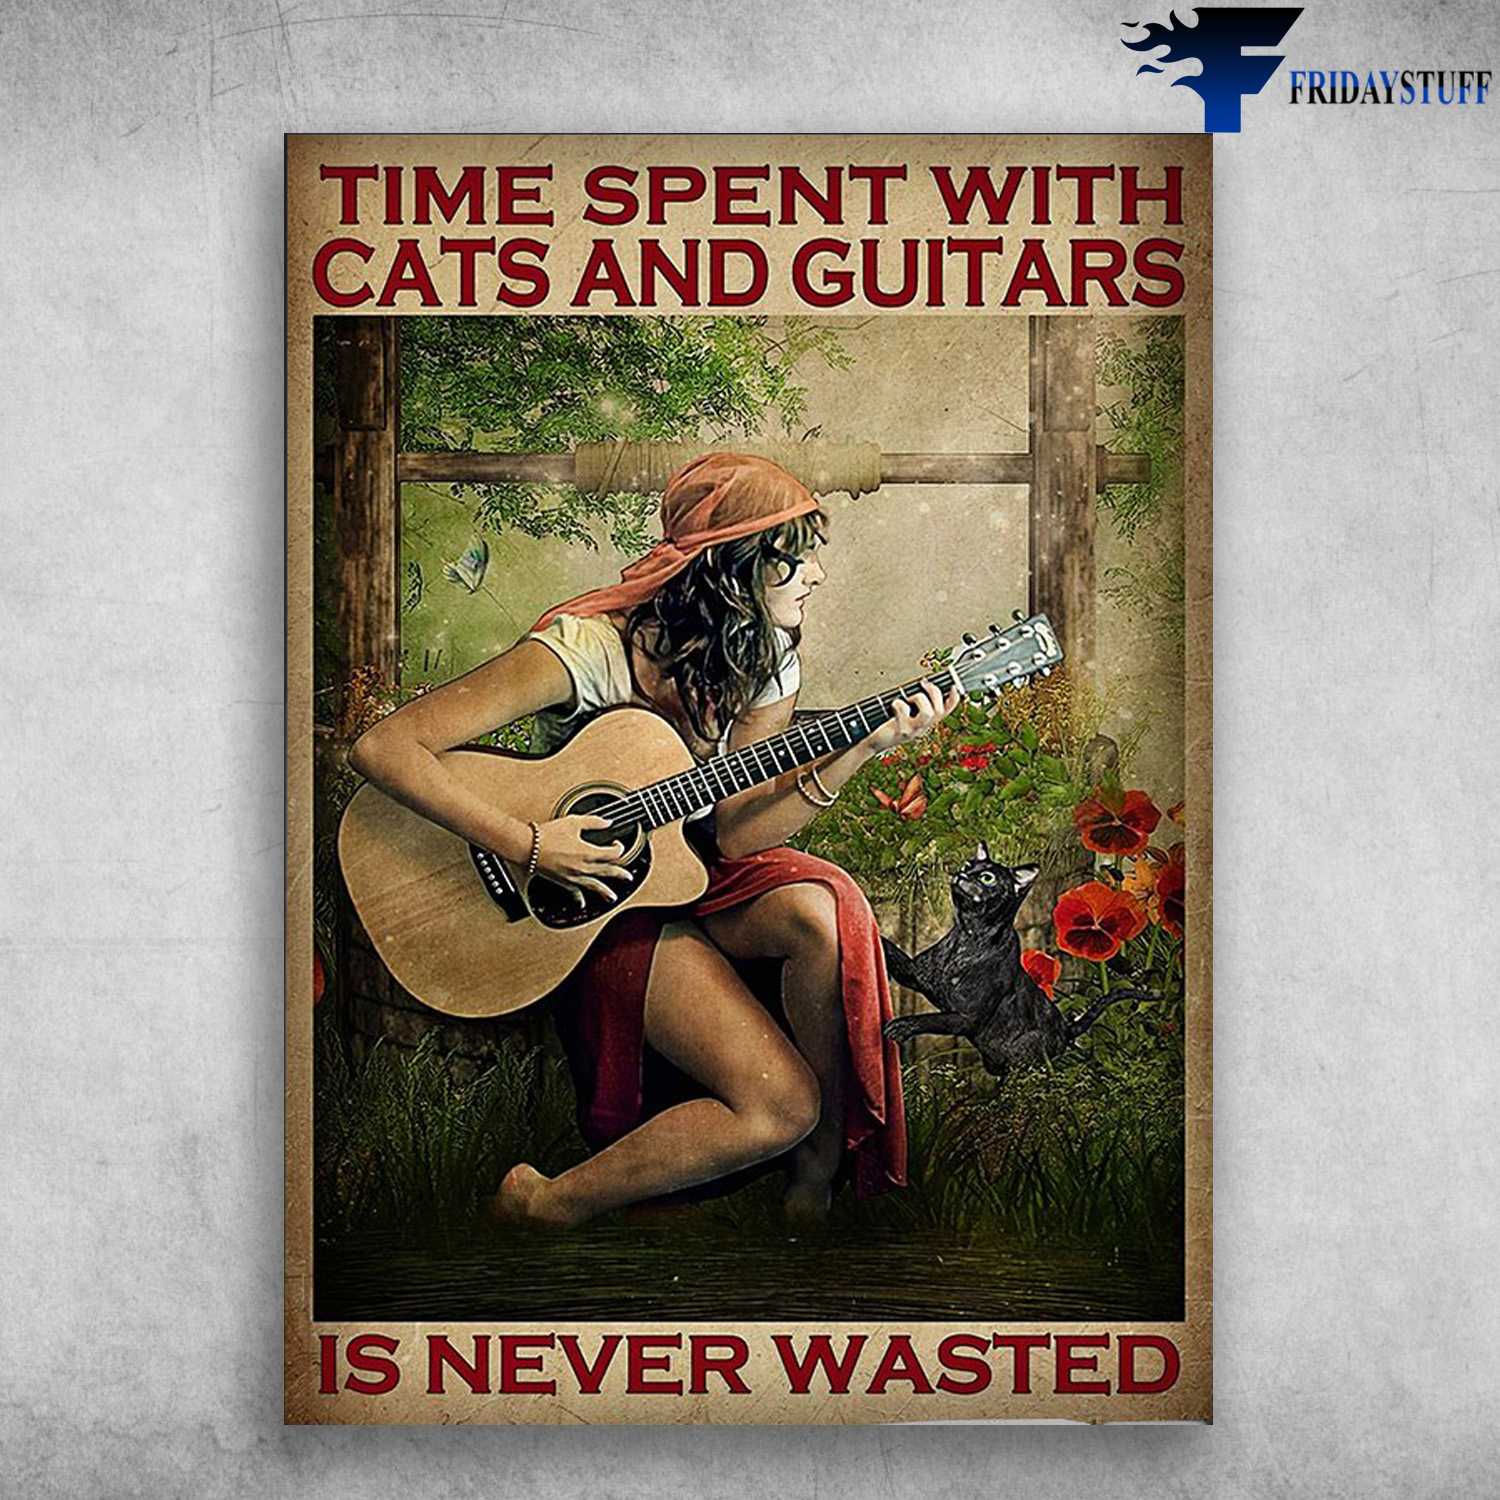 Girl Playing Guitar, Black Cat - Time Spent With, Cats And Guitar, Is Never Wasted